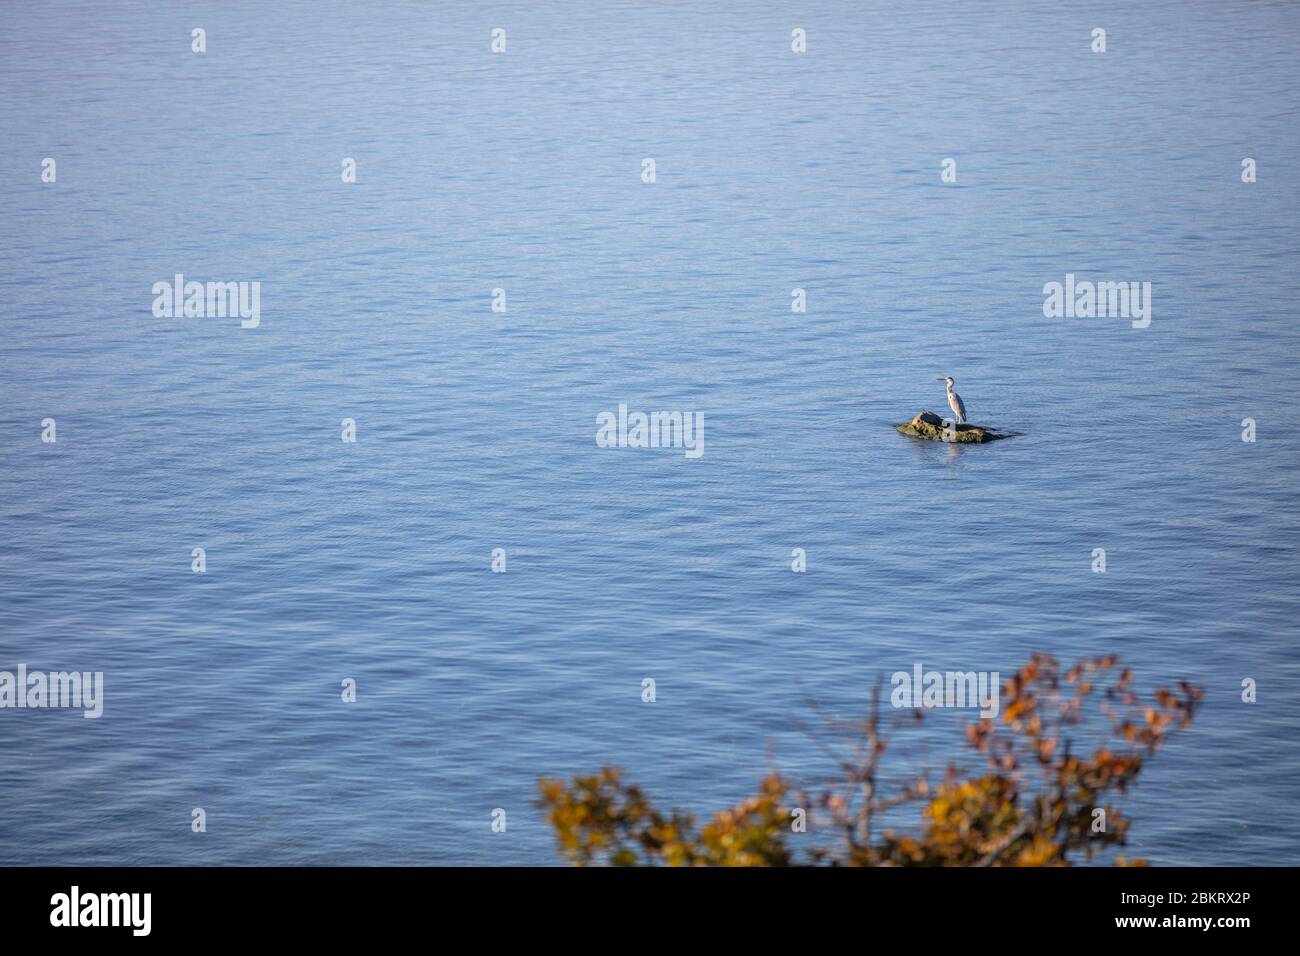 France, Haute-Savoie, towards Yvoire, Pr? Curieux, a Heron posed on a rock on Lake Geneva Stock Photo